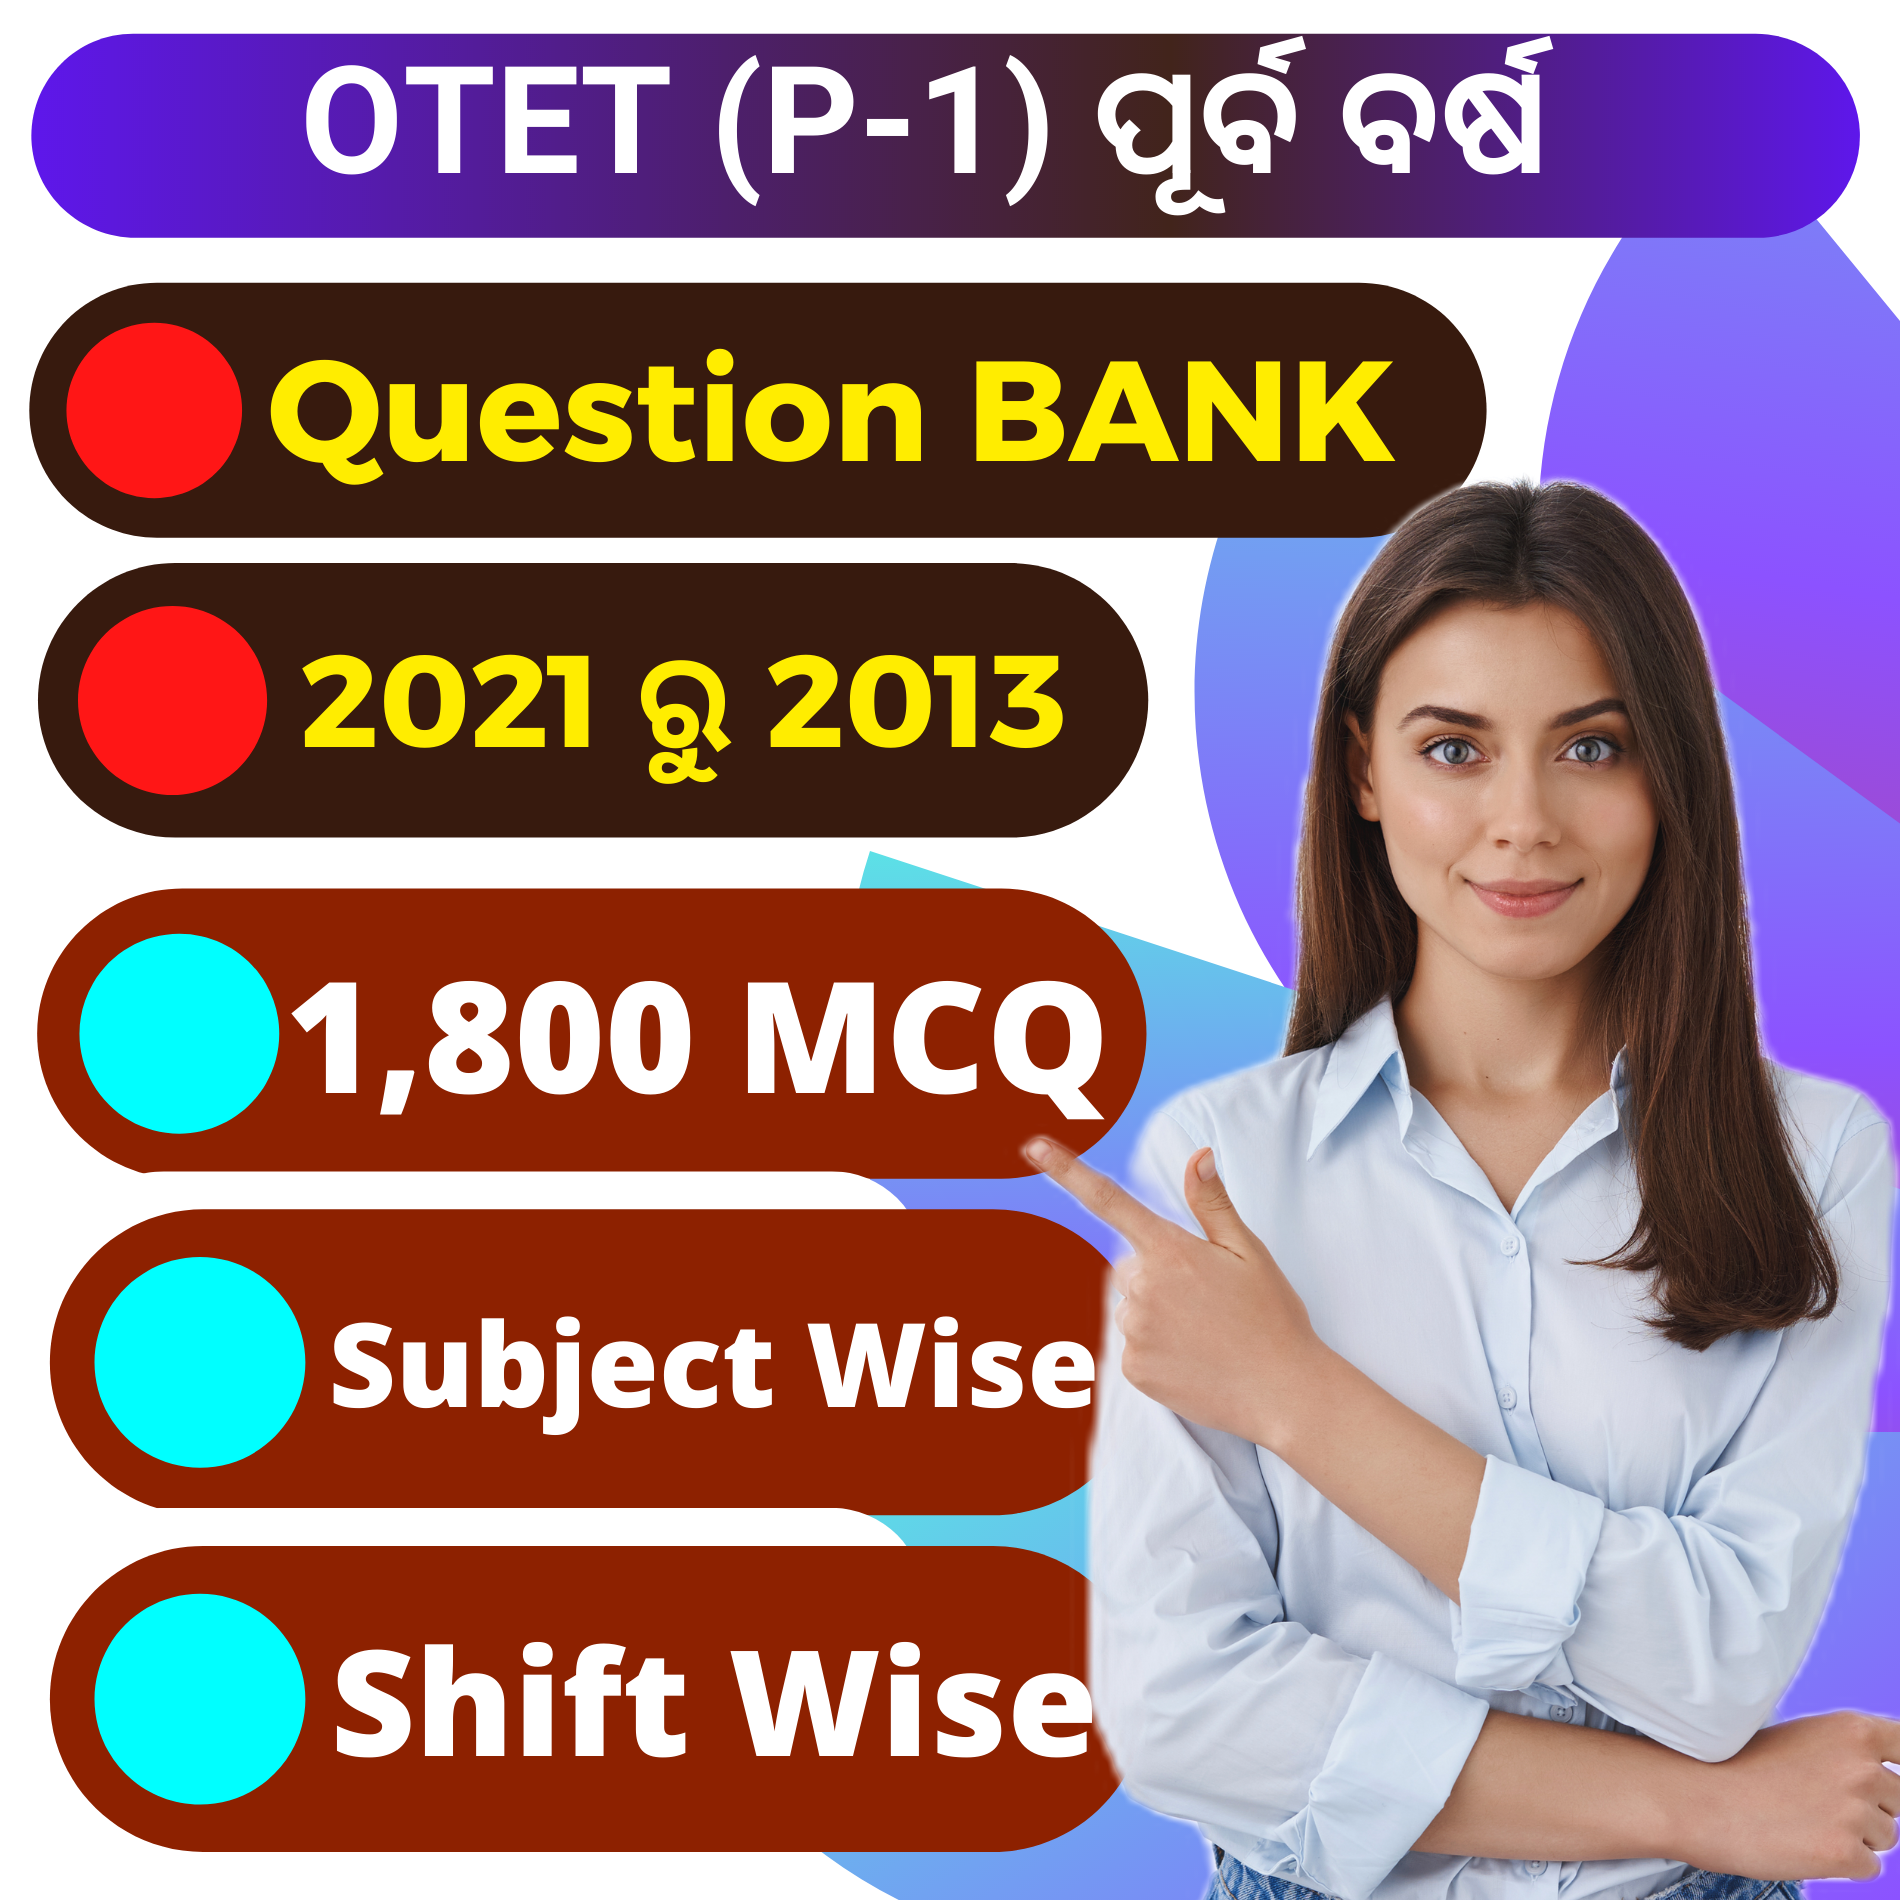 D- OTET P-1 EXAM QUESTION BANK (SUBJECT WISE & SHIFT WISE PREVIOUS YEAR QUESTIONS & ANSWER 2021 To 2013) 